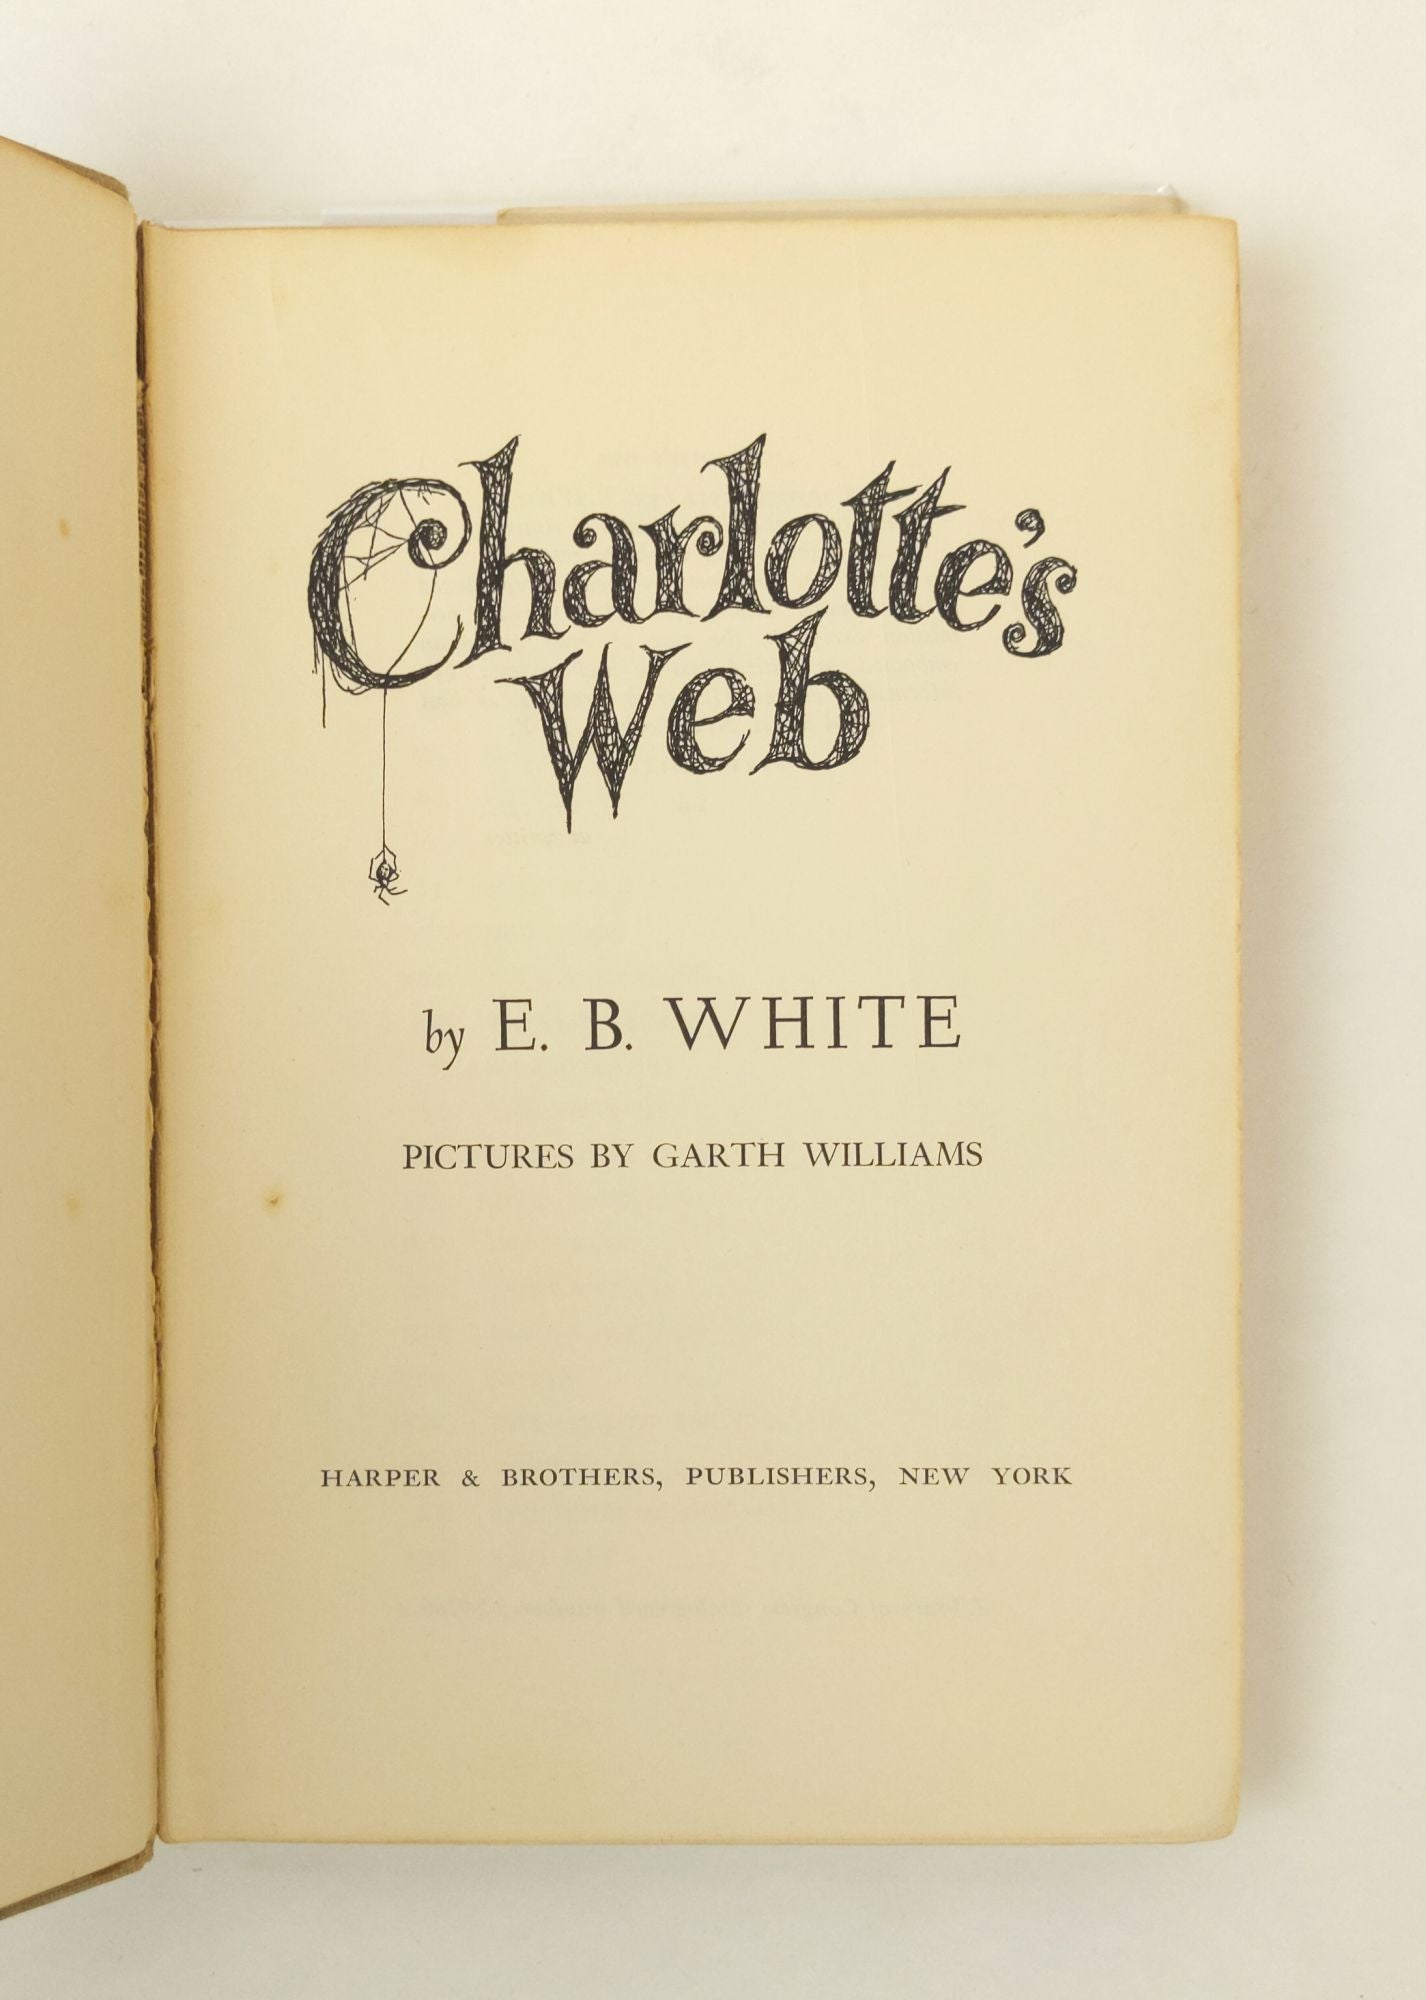 Product Image for CHARLOTTE'S WEB